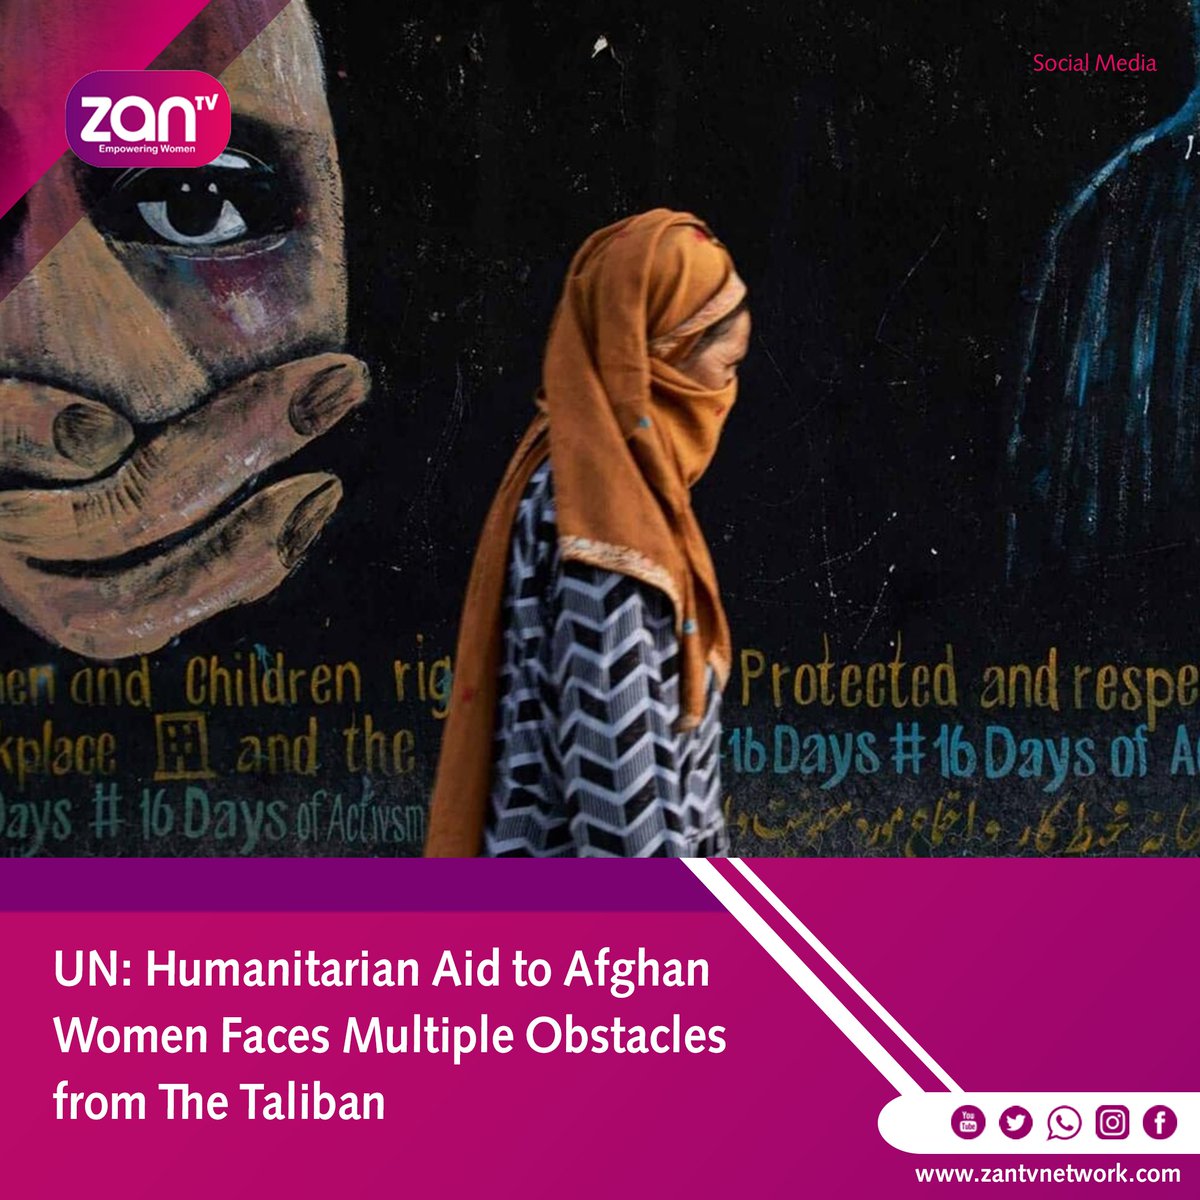 A new survey by UN Women has found that humanitarian aid to women in Afghanistan is facing multiple obstacles from the Taliban. The survey, released yesterday Tuesday (April 30), was conducted with 127 national and international aid organizations and UN offices in 14 sectors…